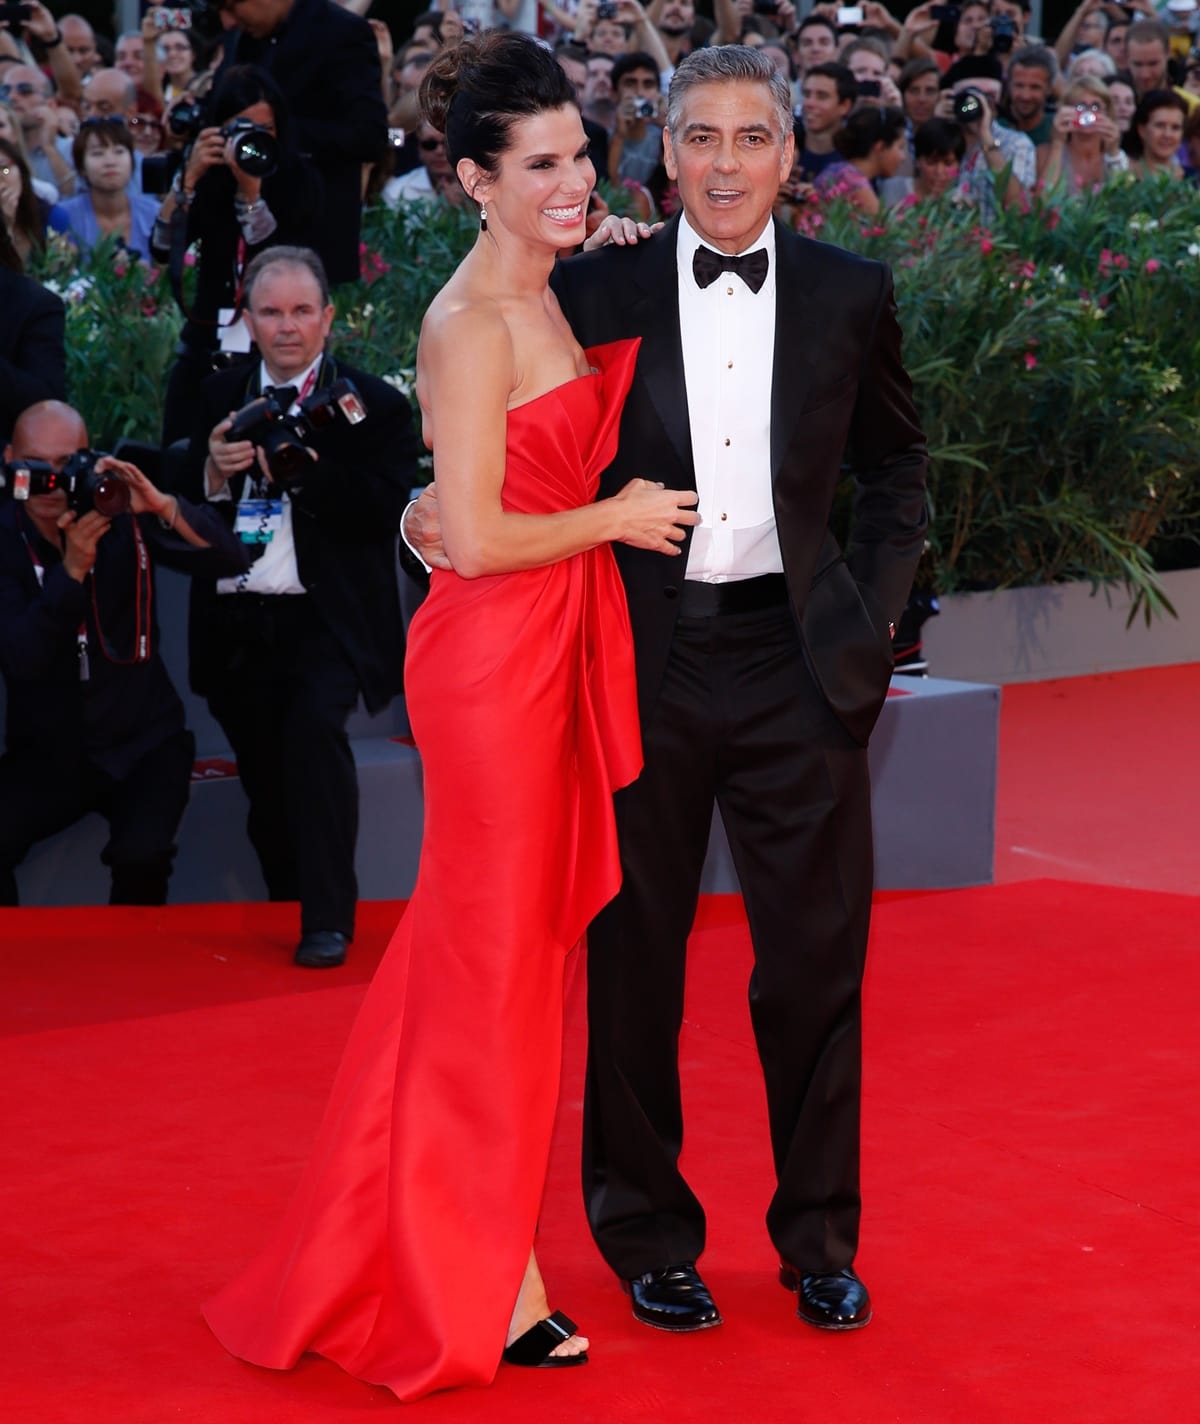 Actor George Clooney and actress Sandra Bullock, in a J. Mendel siren red strapless gown and Roger Vivier shoes, attend the "Gravity" Premiere and Opening Ceremony during the 70th Venice International Film Festival